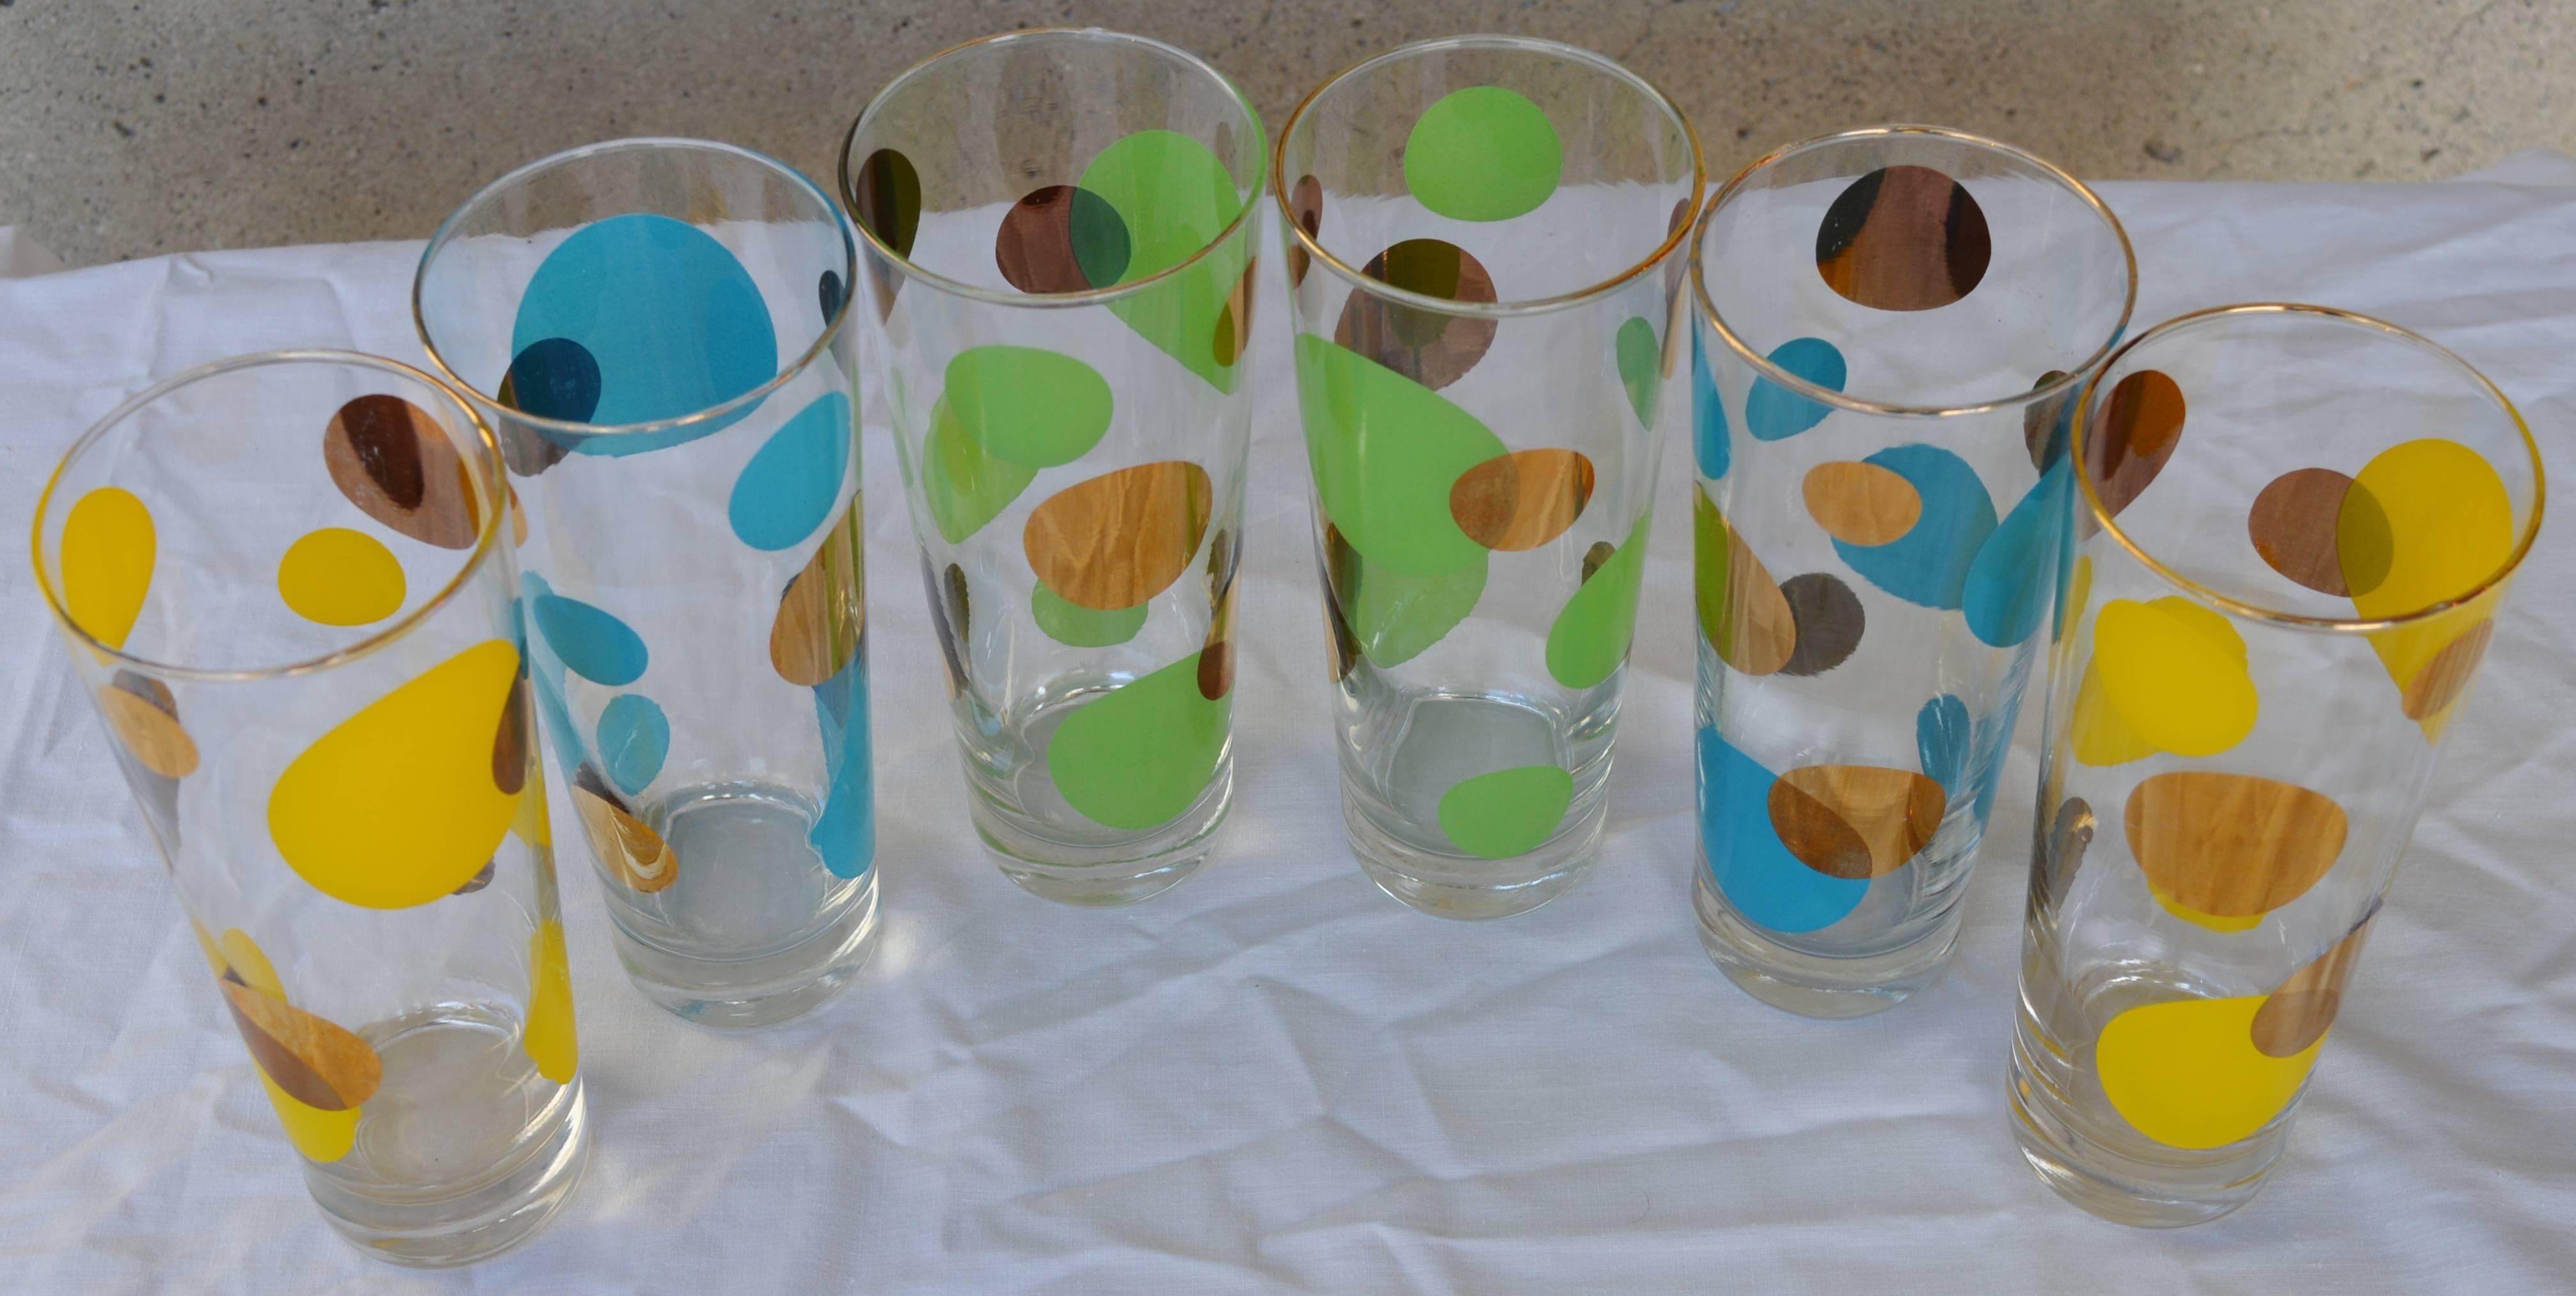 A fantastic set of vintage barware designed by Russel Wright for Bartlett-Collins. This 1950s Atomic Era styled set consists of six hi-ball glasses, two of each in yellow, green and blue with gold. The pattern is clear, sharp and unfaded and